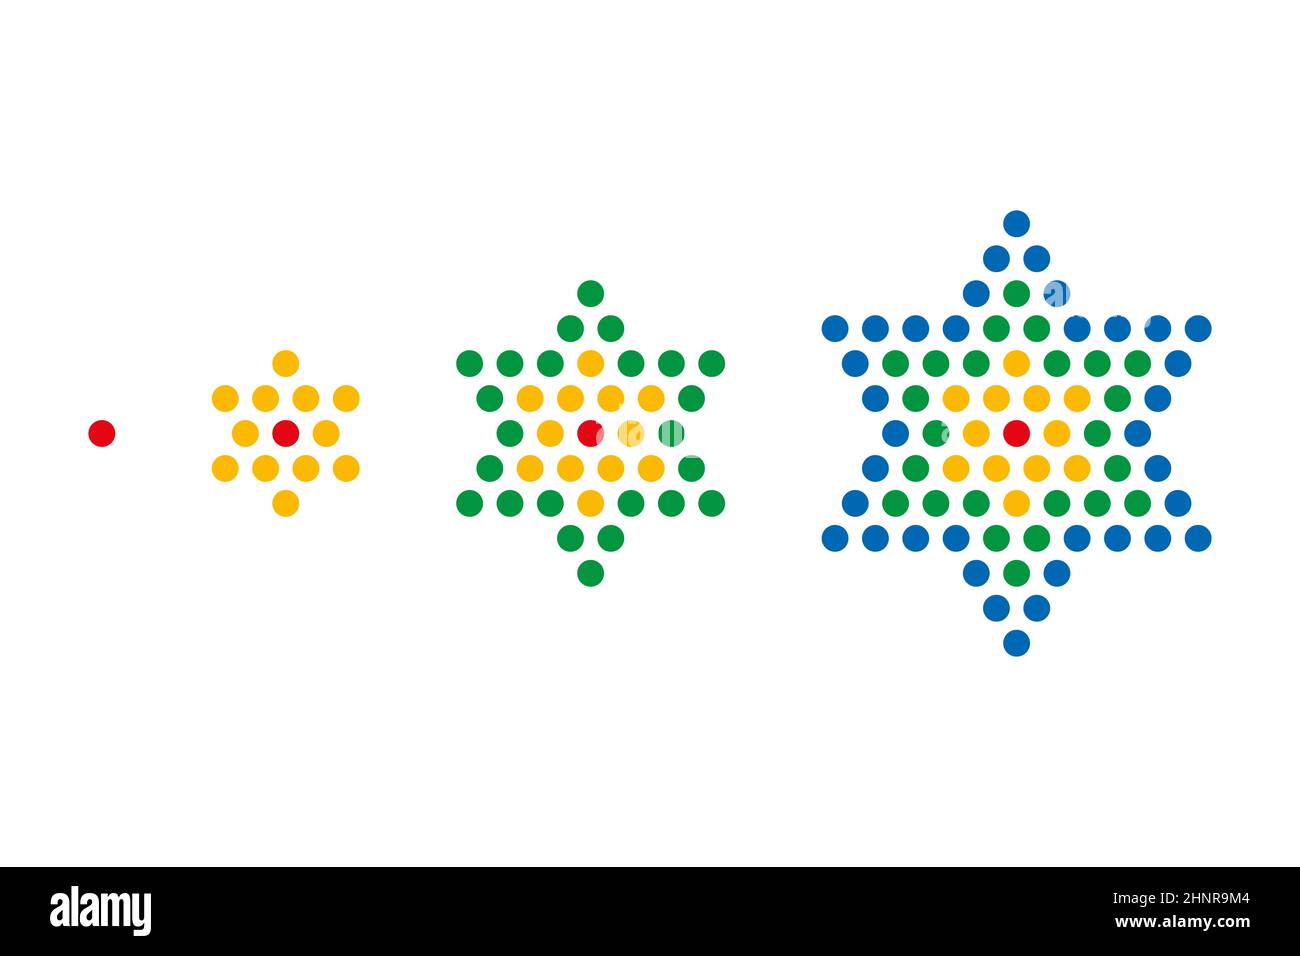 First four star numbers shown by colored dots. Centered figurate number, a centered hexagram (six-pointed star), such as the Star of David. Stock Photo